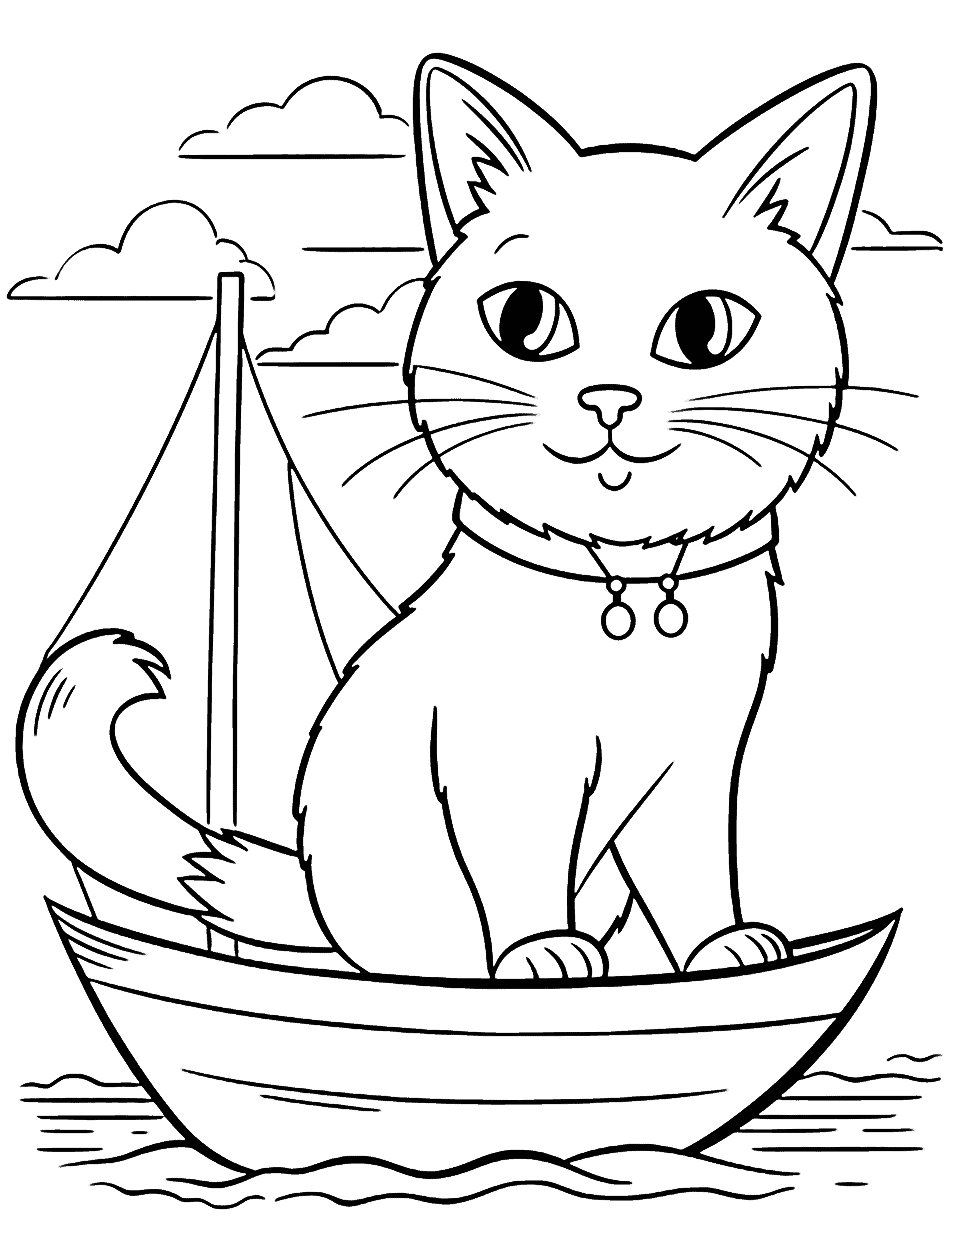 Cat on a Summer Boat Ride Coloring Page - A cat enjoying a relaxing boat ride on a summer lake.